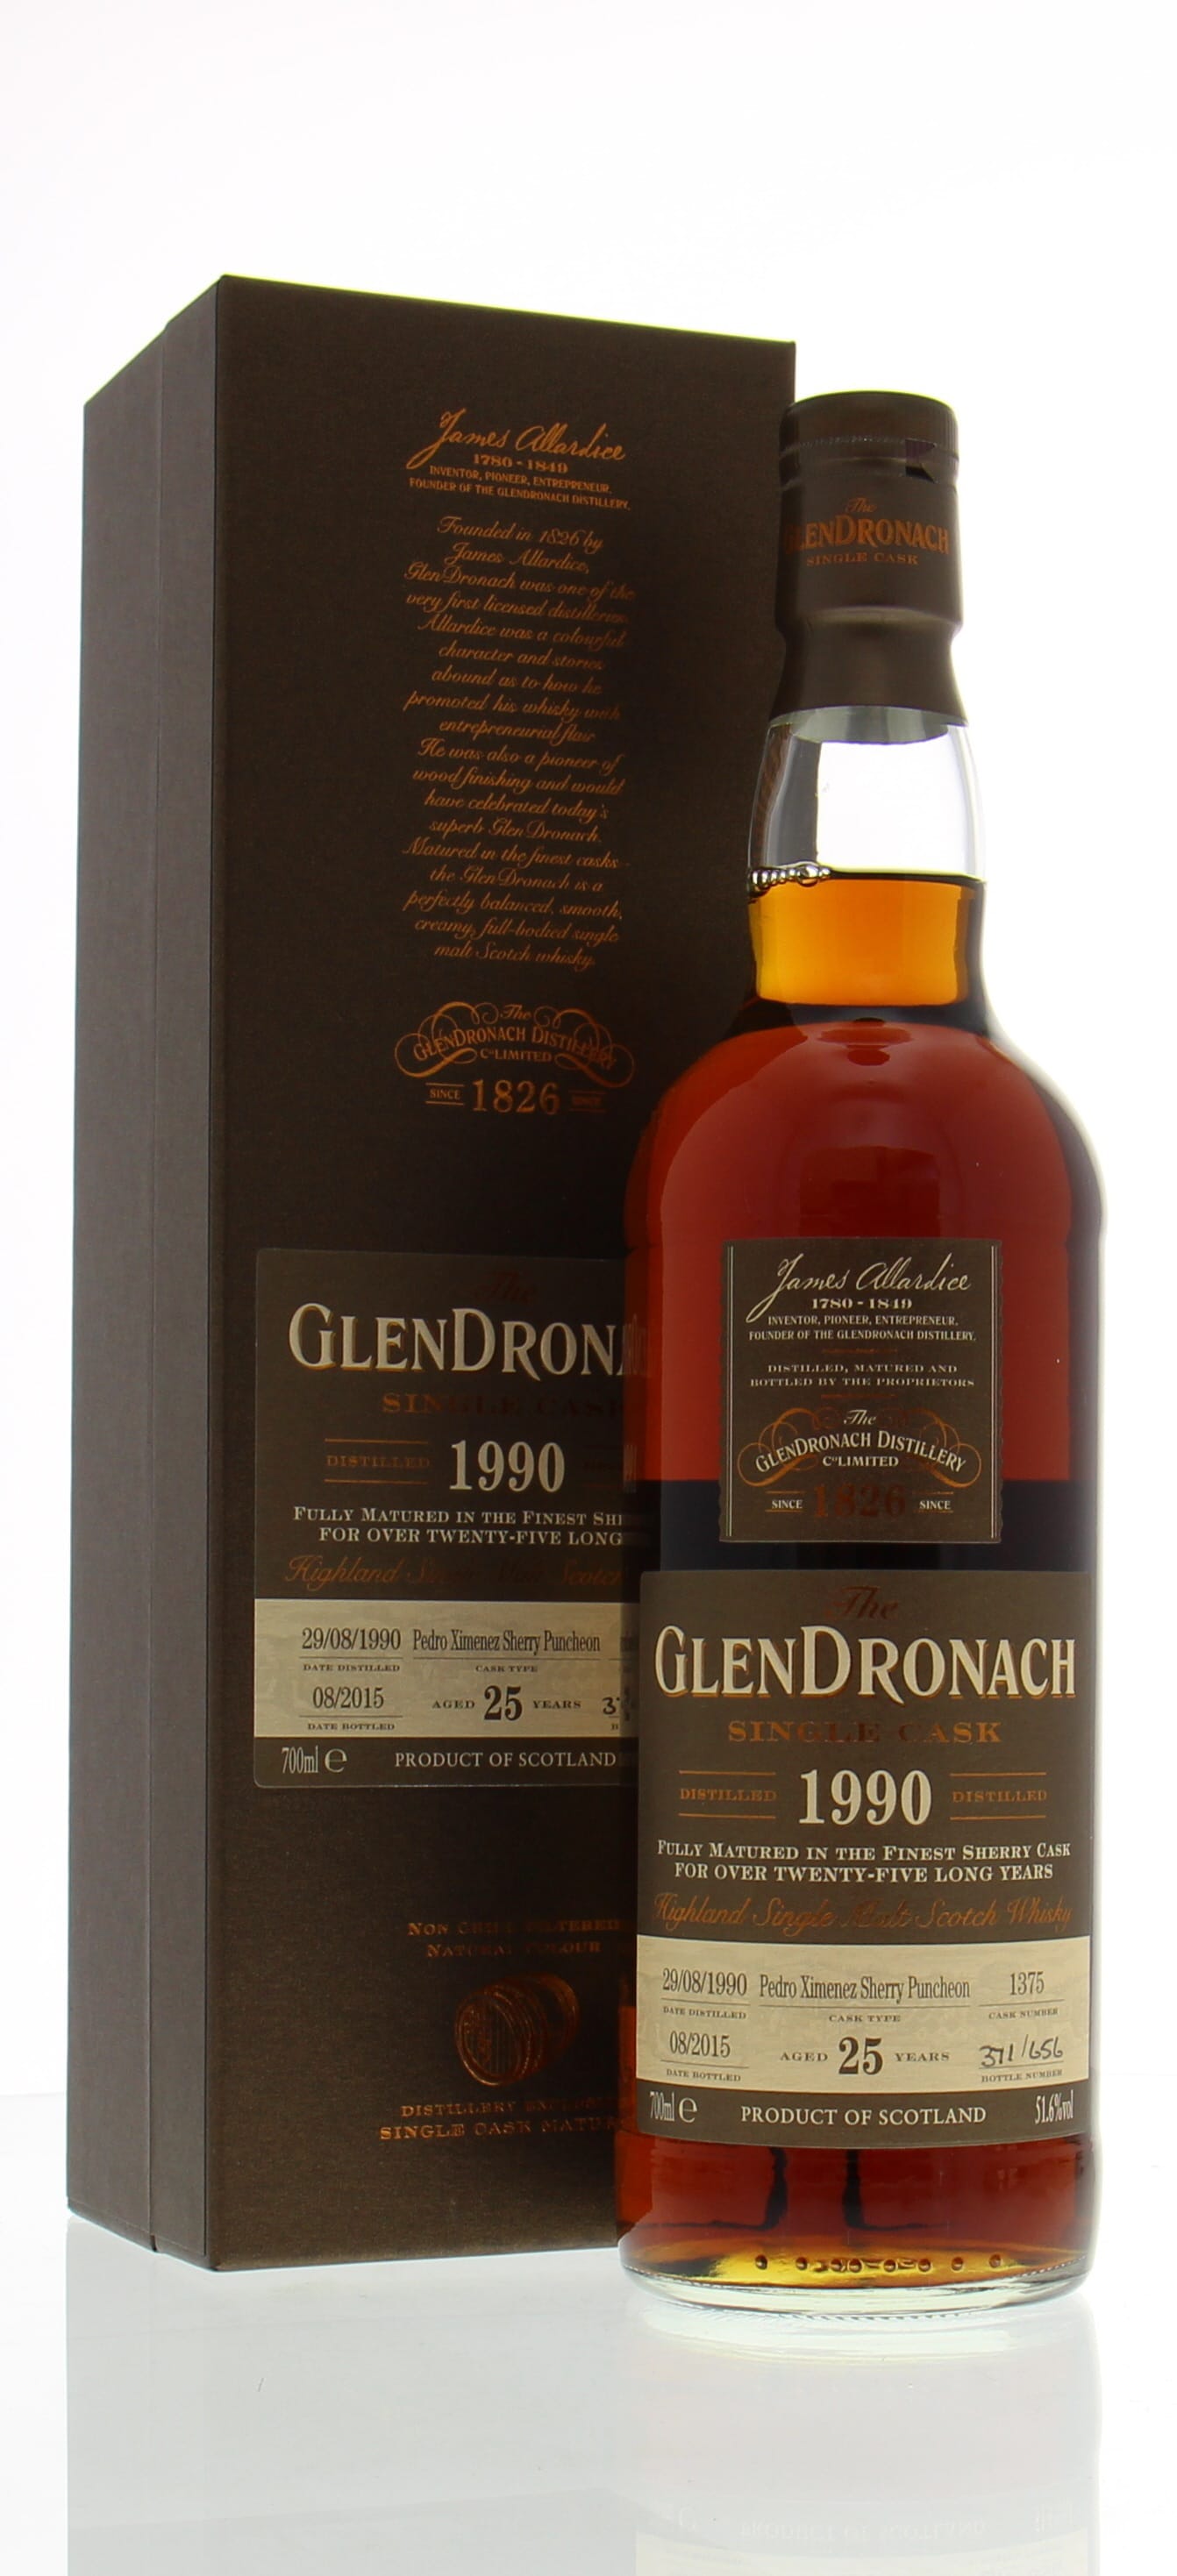 Glendronach - 25 Years Old Batch 12 Pedro Ximénez Sherry Puncheon Single Cask:1375 1 of 656 Bottles 51.6% 1990 In Original Container